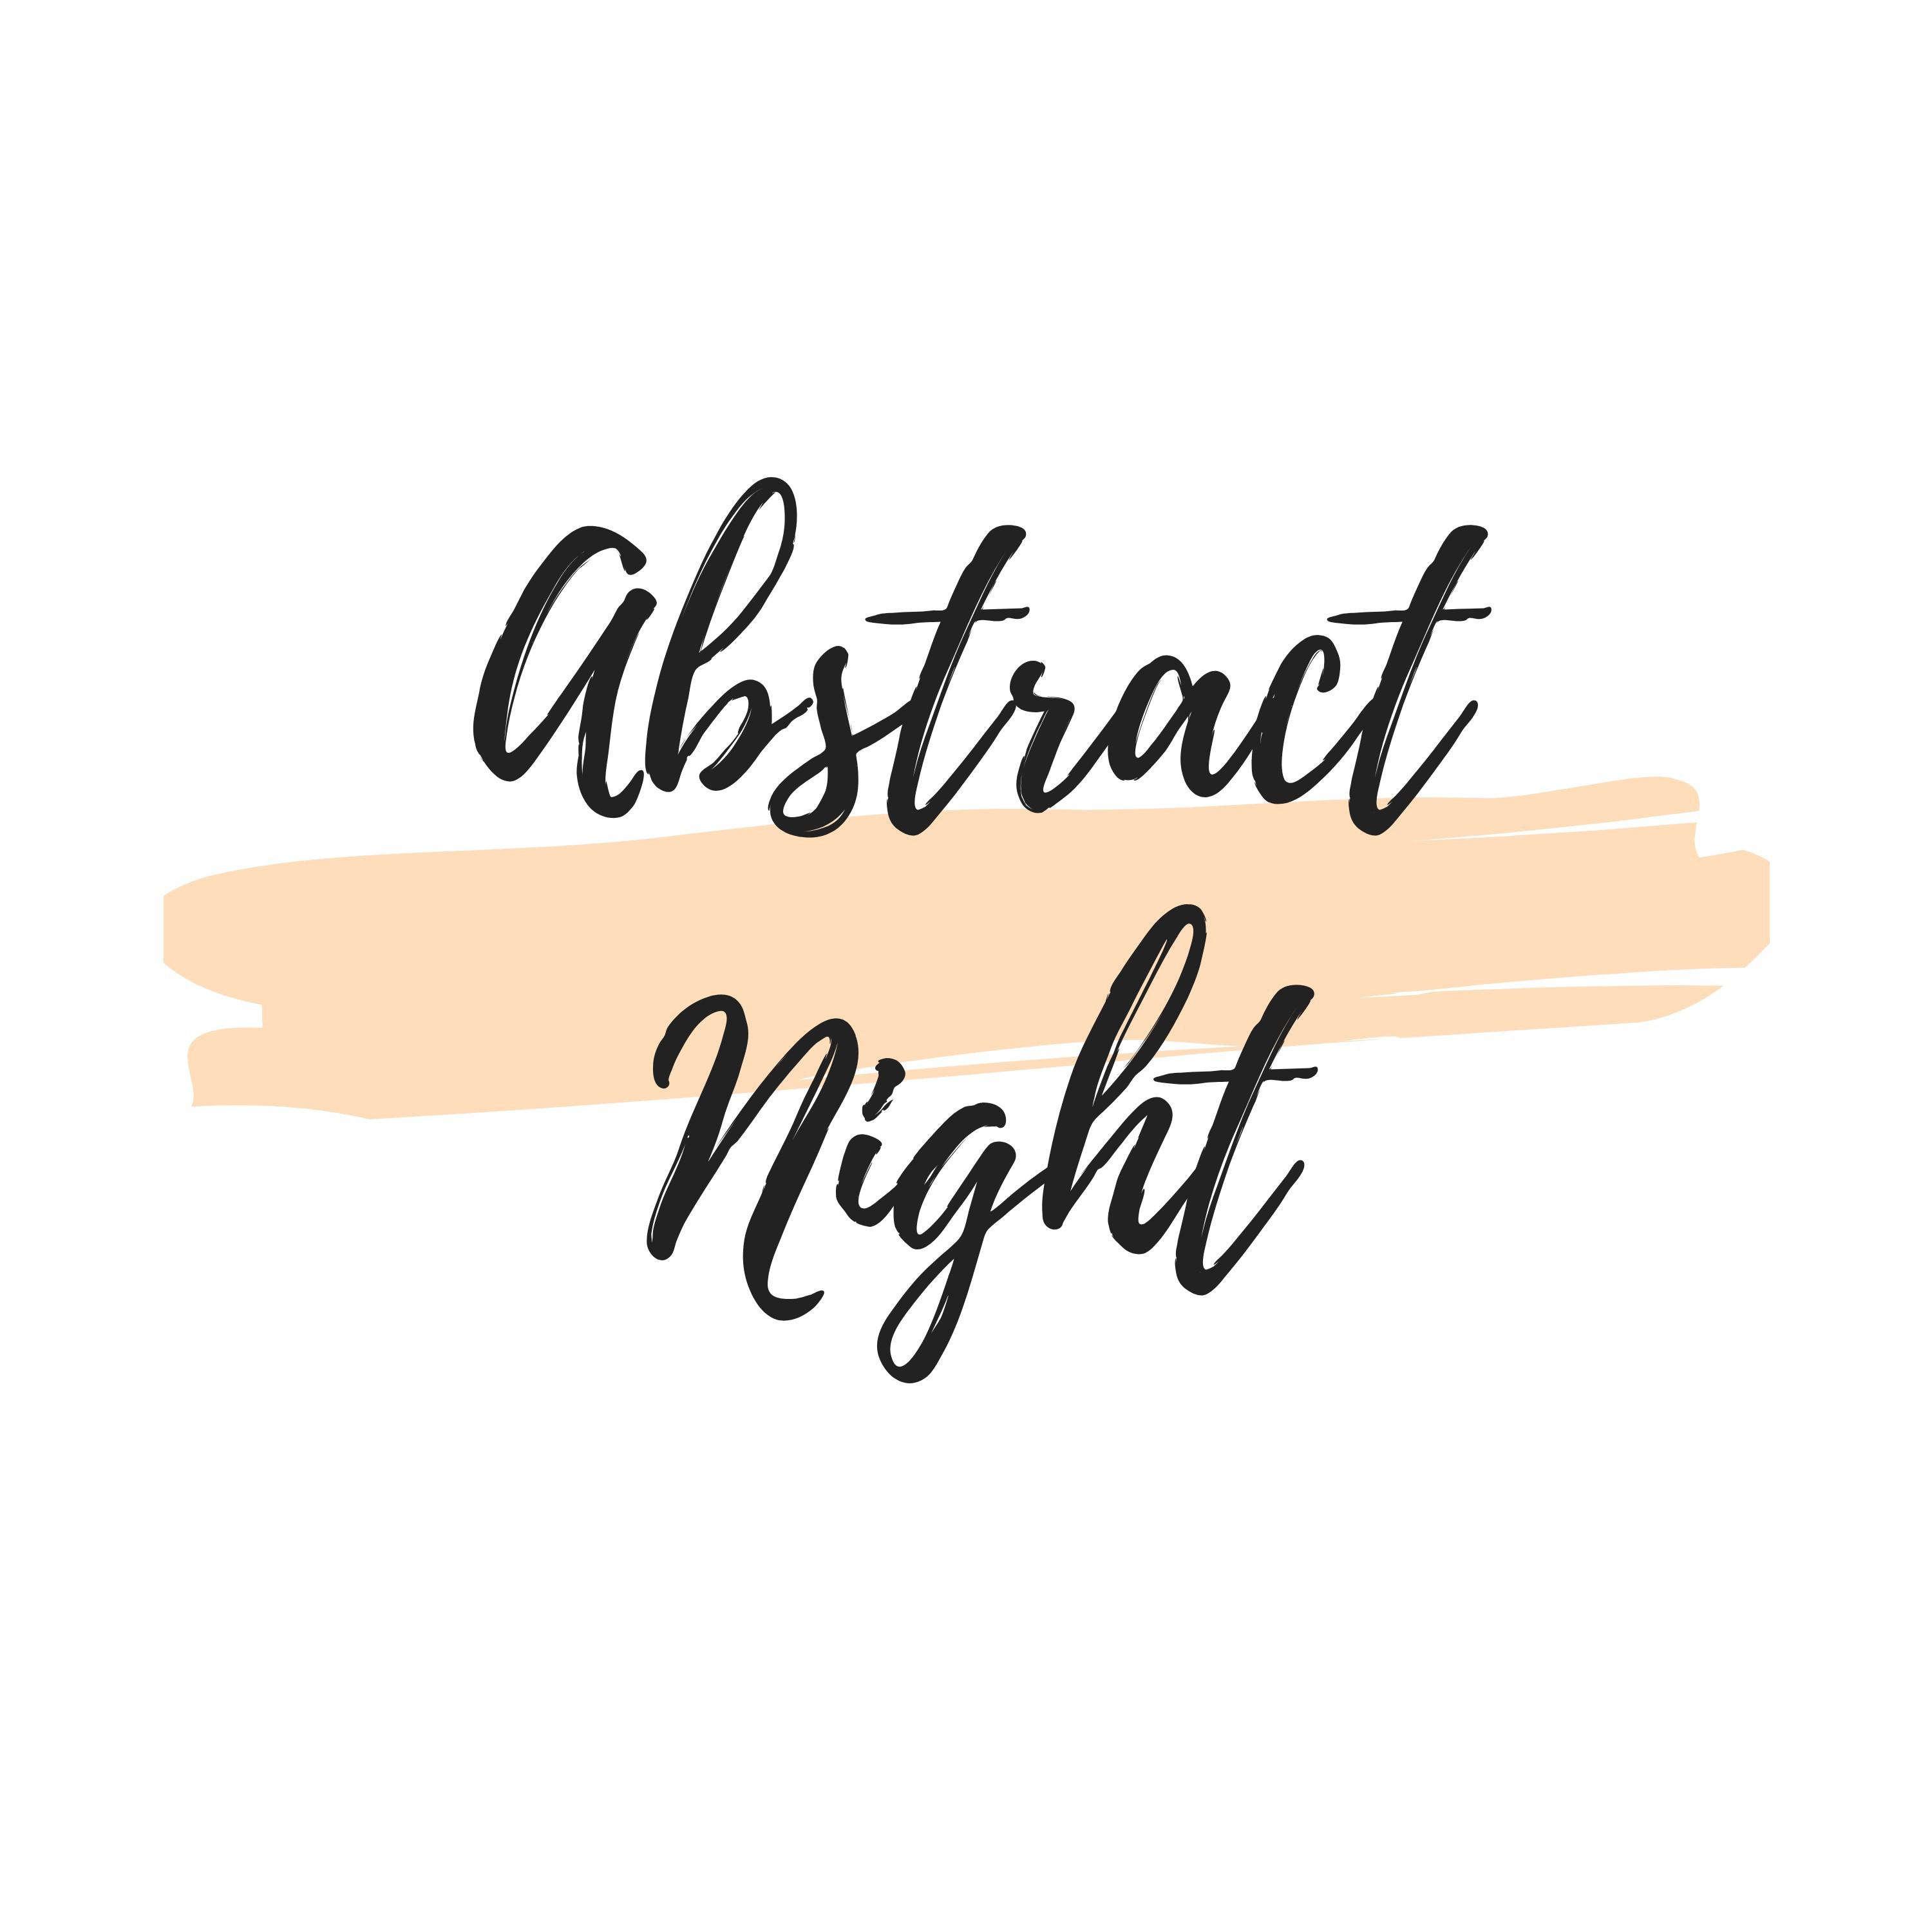 Abstract Night